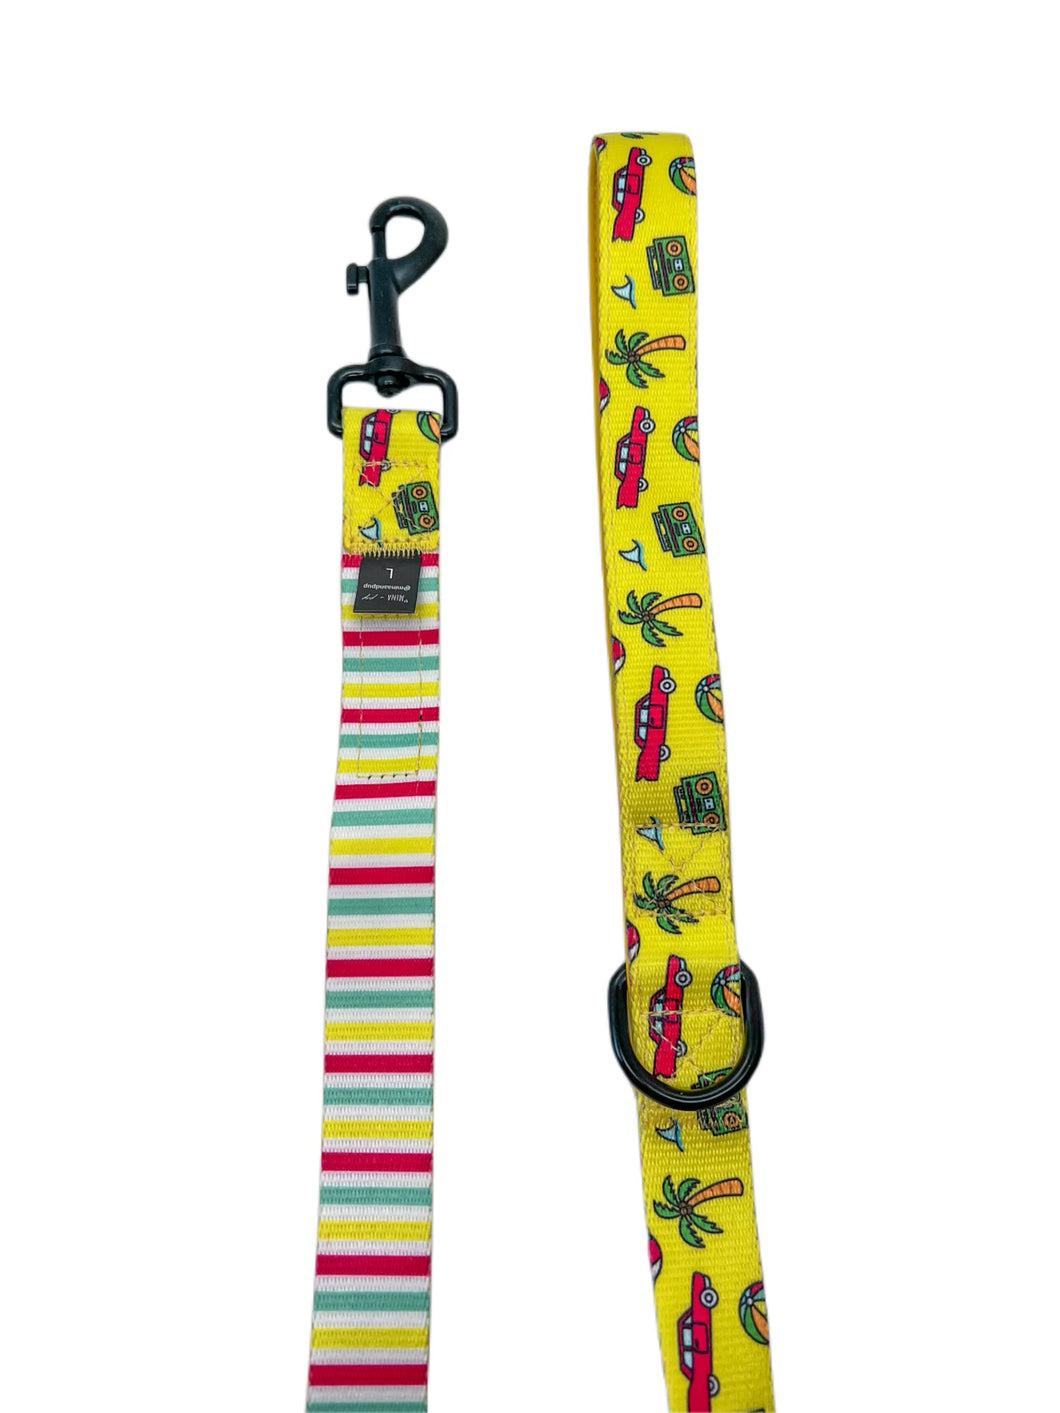 Beach Bum Collection 5 Foot Comfort Leash With Two Prints in One